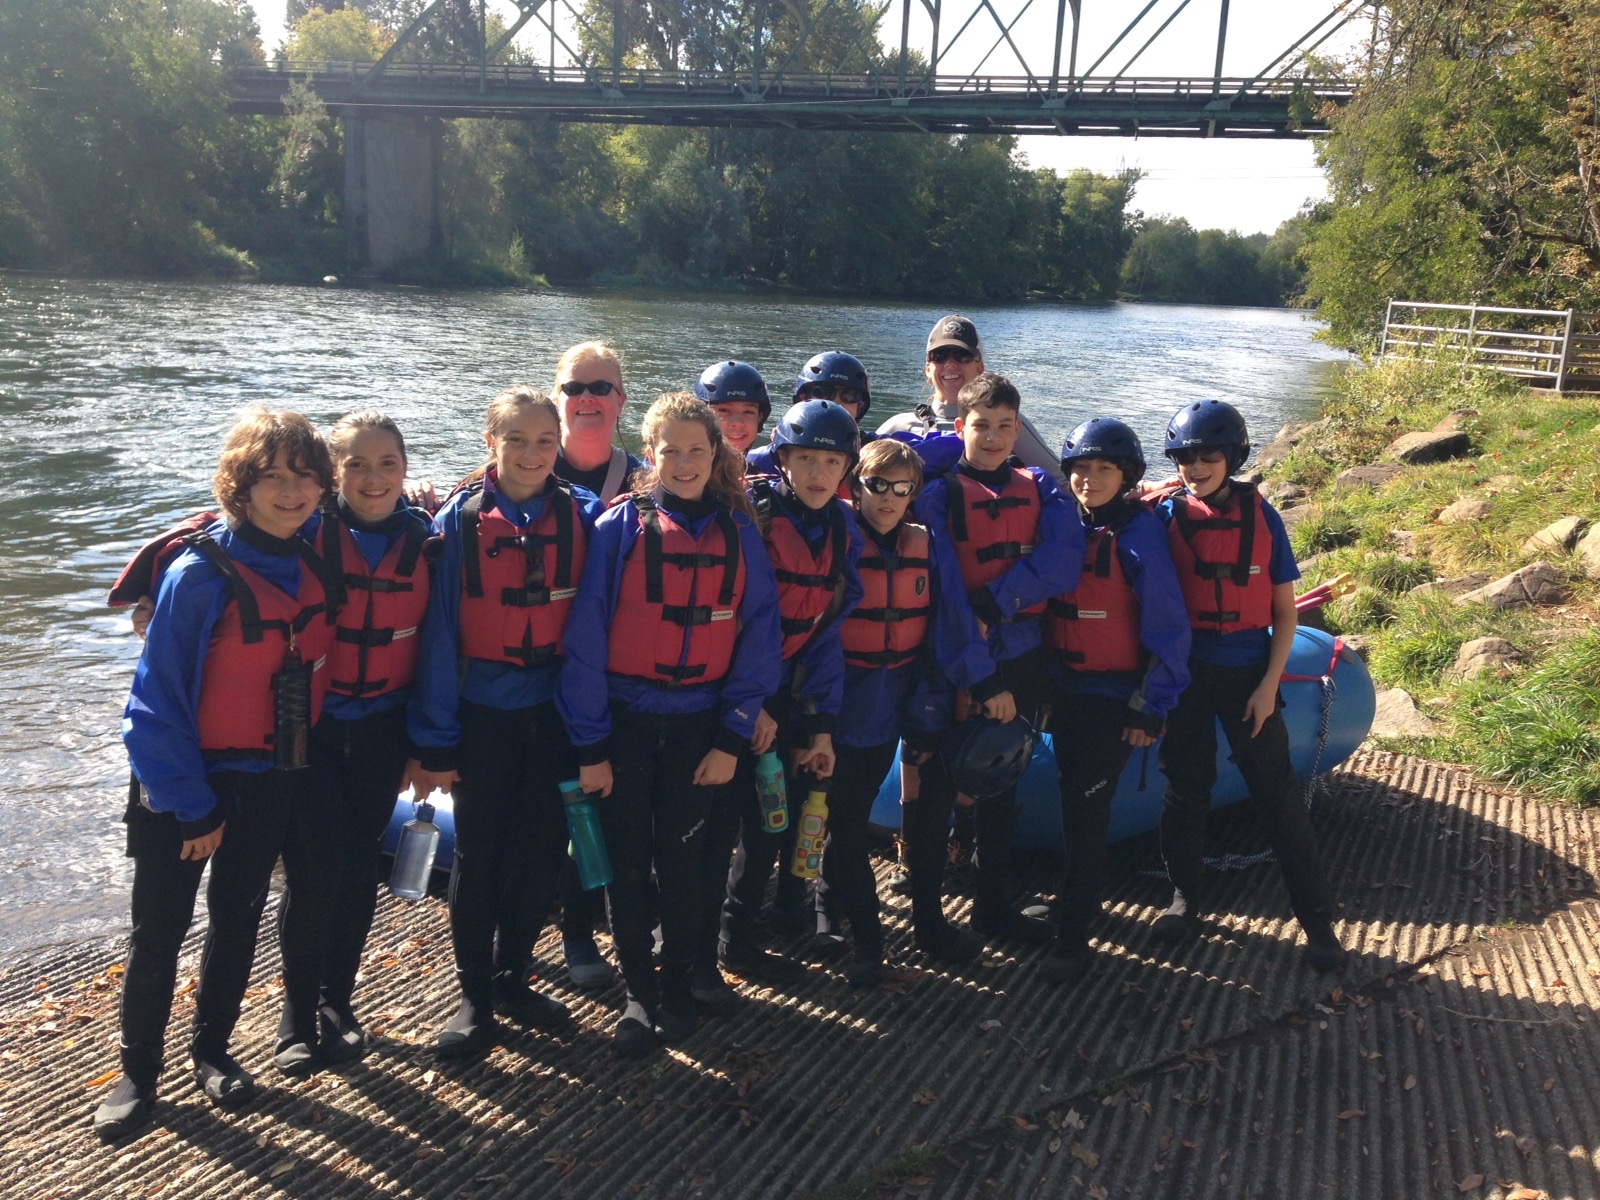 A group of students wearing blue life jackets and helmets poses for a photo by a river. A bridge and trees are in the background, suggesting preparation for a water activity, possibly rafting.